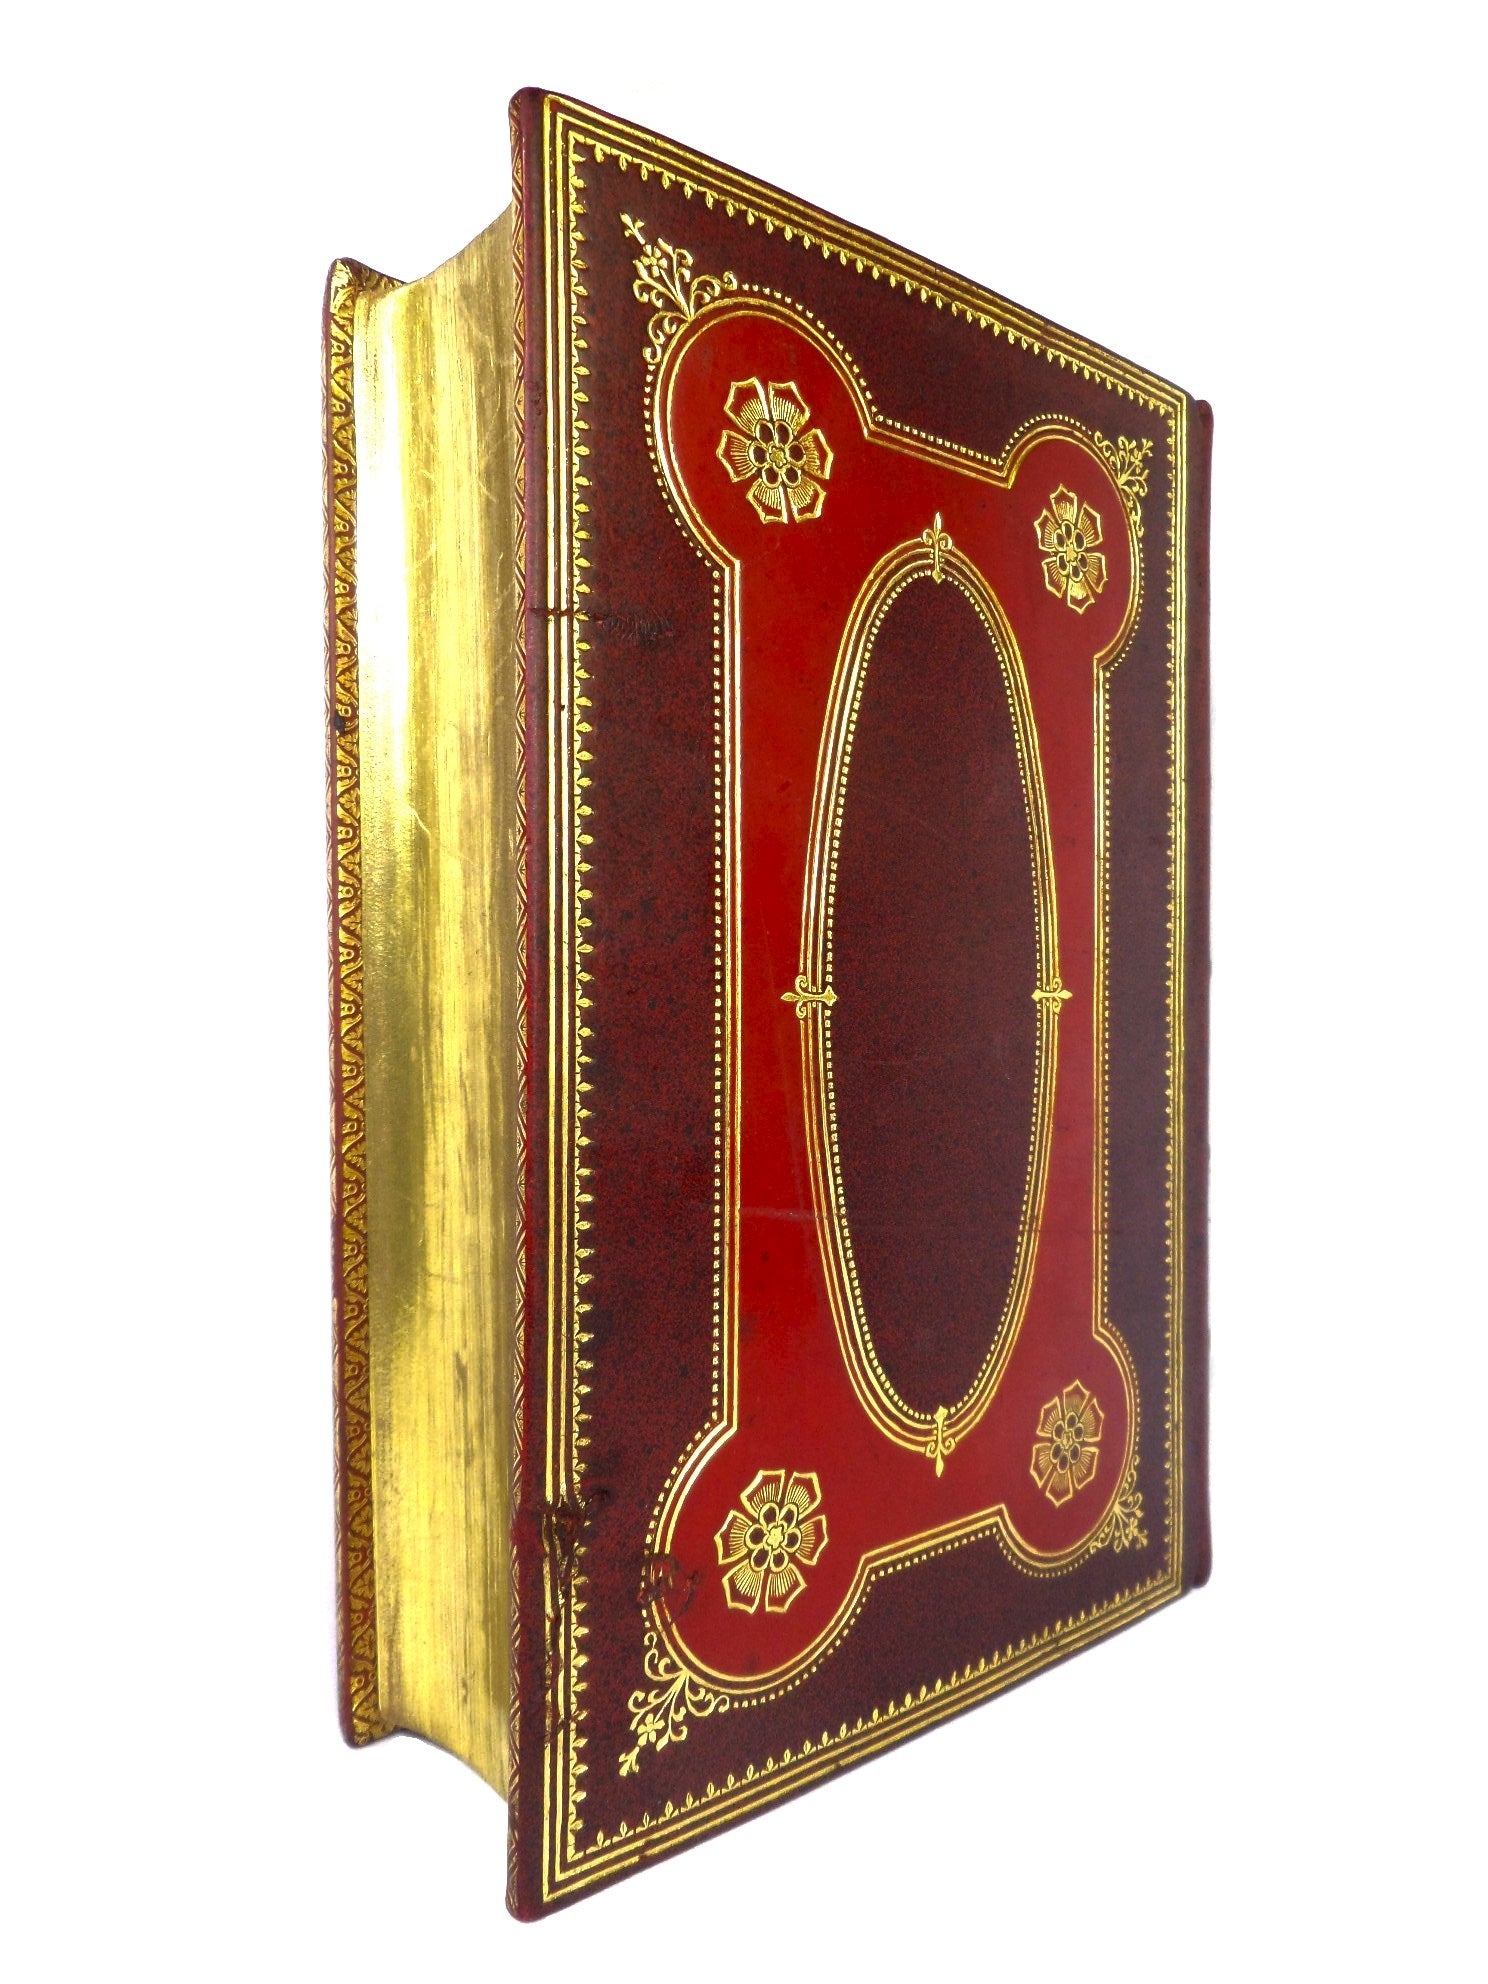 THE COMPLETE WORKS OF WILLIAM SHAKESPEARE 1919 FINE RIVIERE BINDING